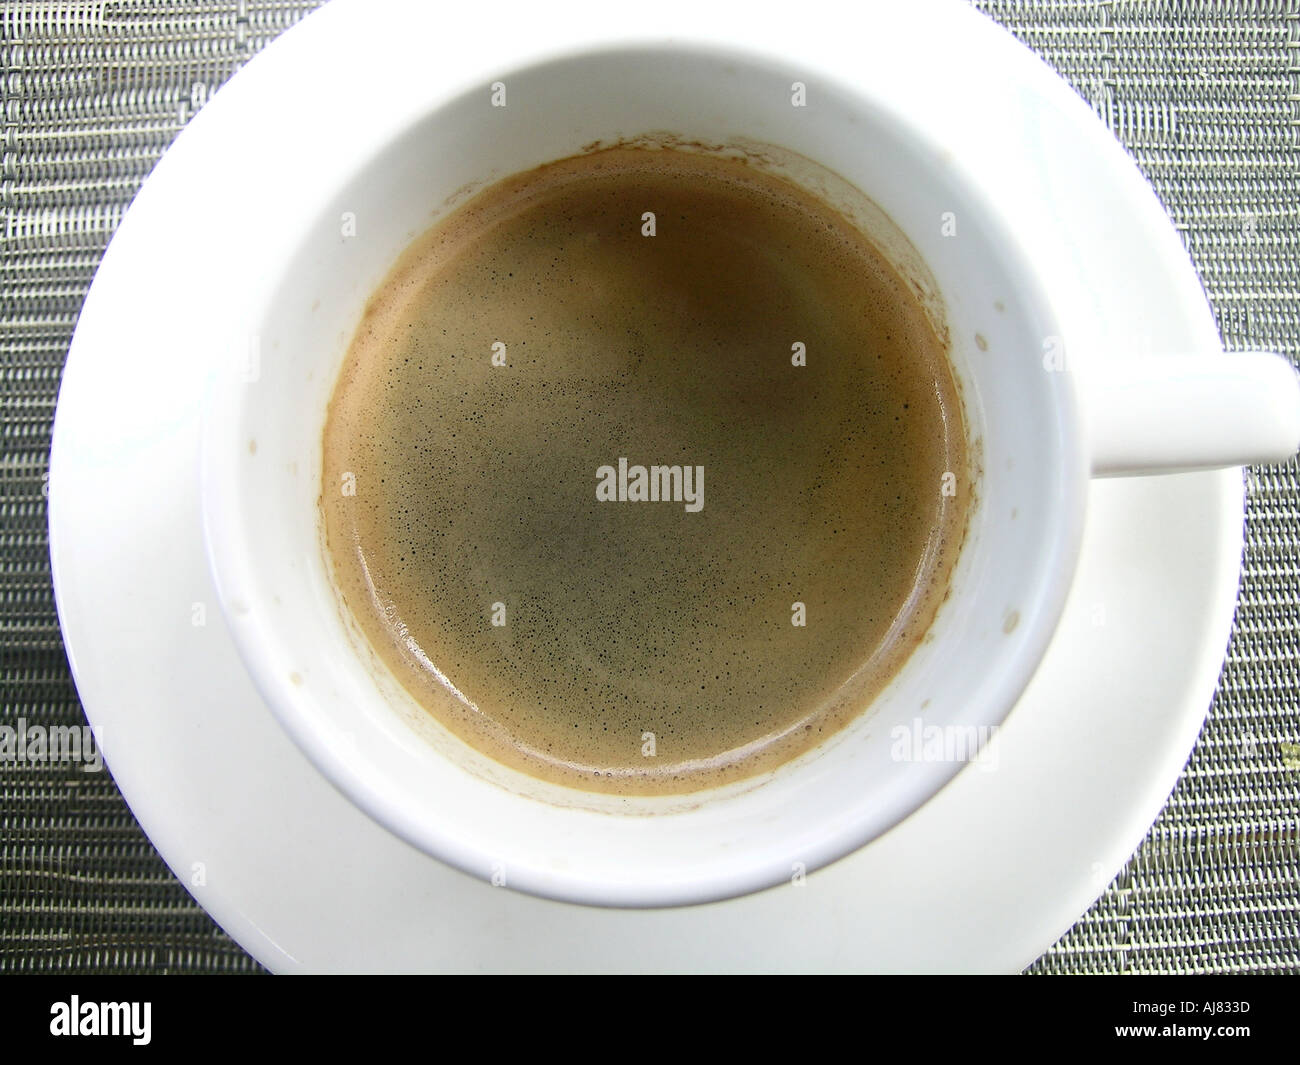 Overhead view of cup of black espresso coffee & saucer on bar Stock Photo